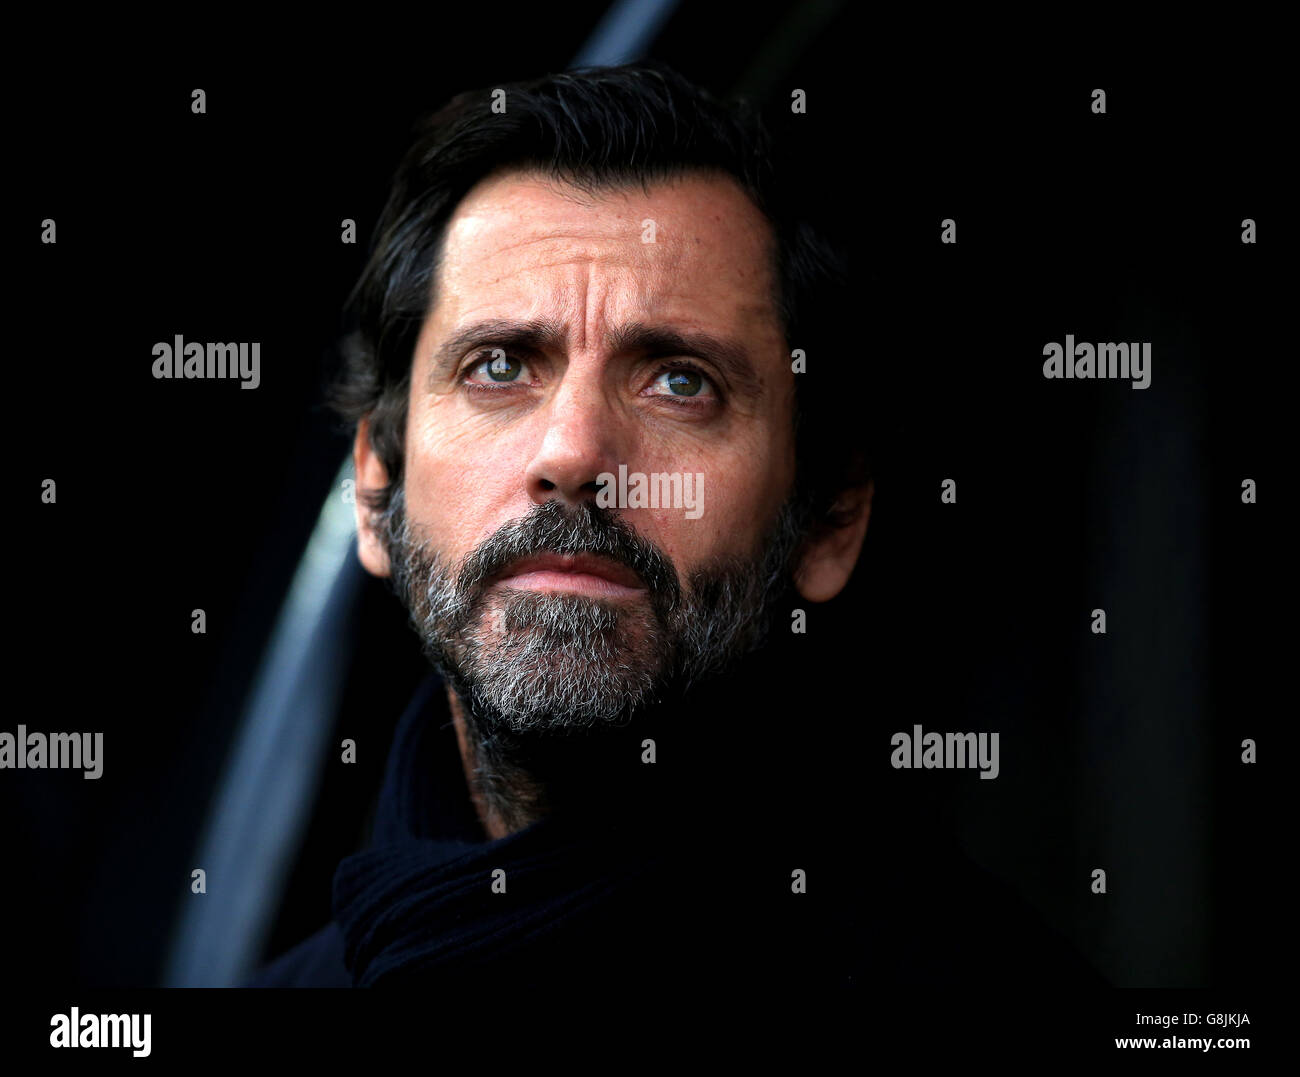 Watford v Newcastle United - Emirates FA Cup - Third Round - Vicarage Road. Watford's Manager Quique Sanchez Flores before the game the Emirates FA Cup, third round game at Vicarage Road, Watford. Stock Photo